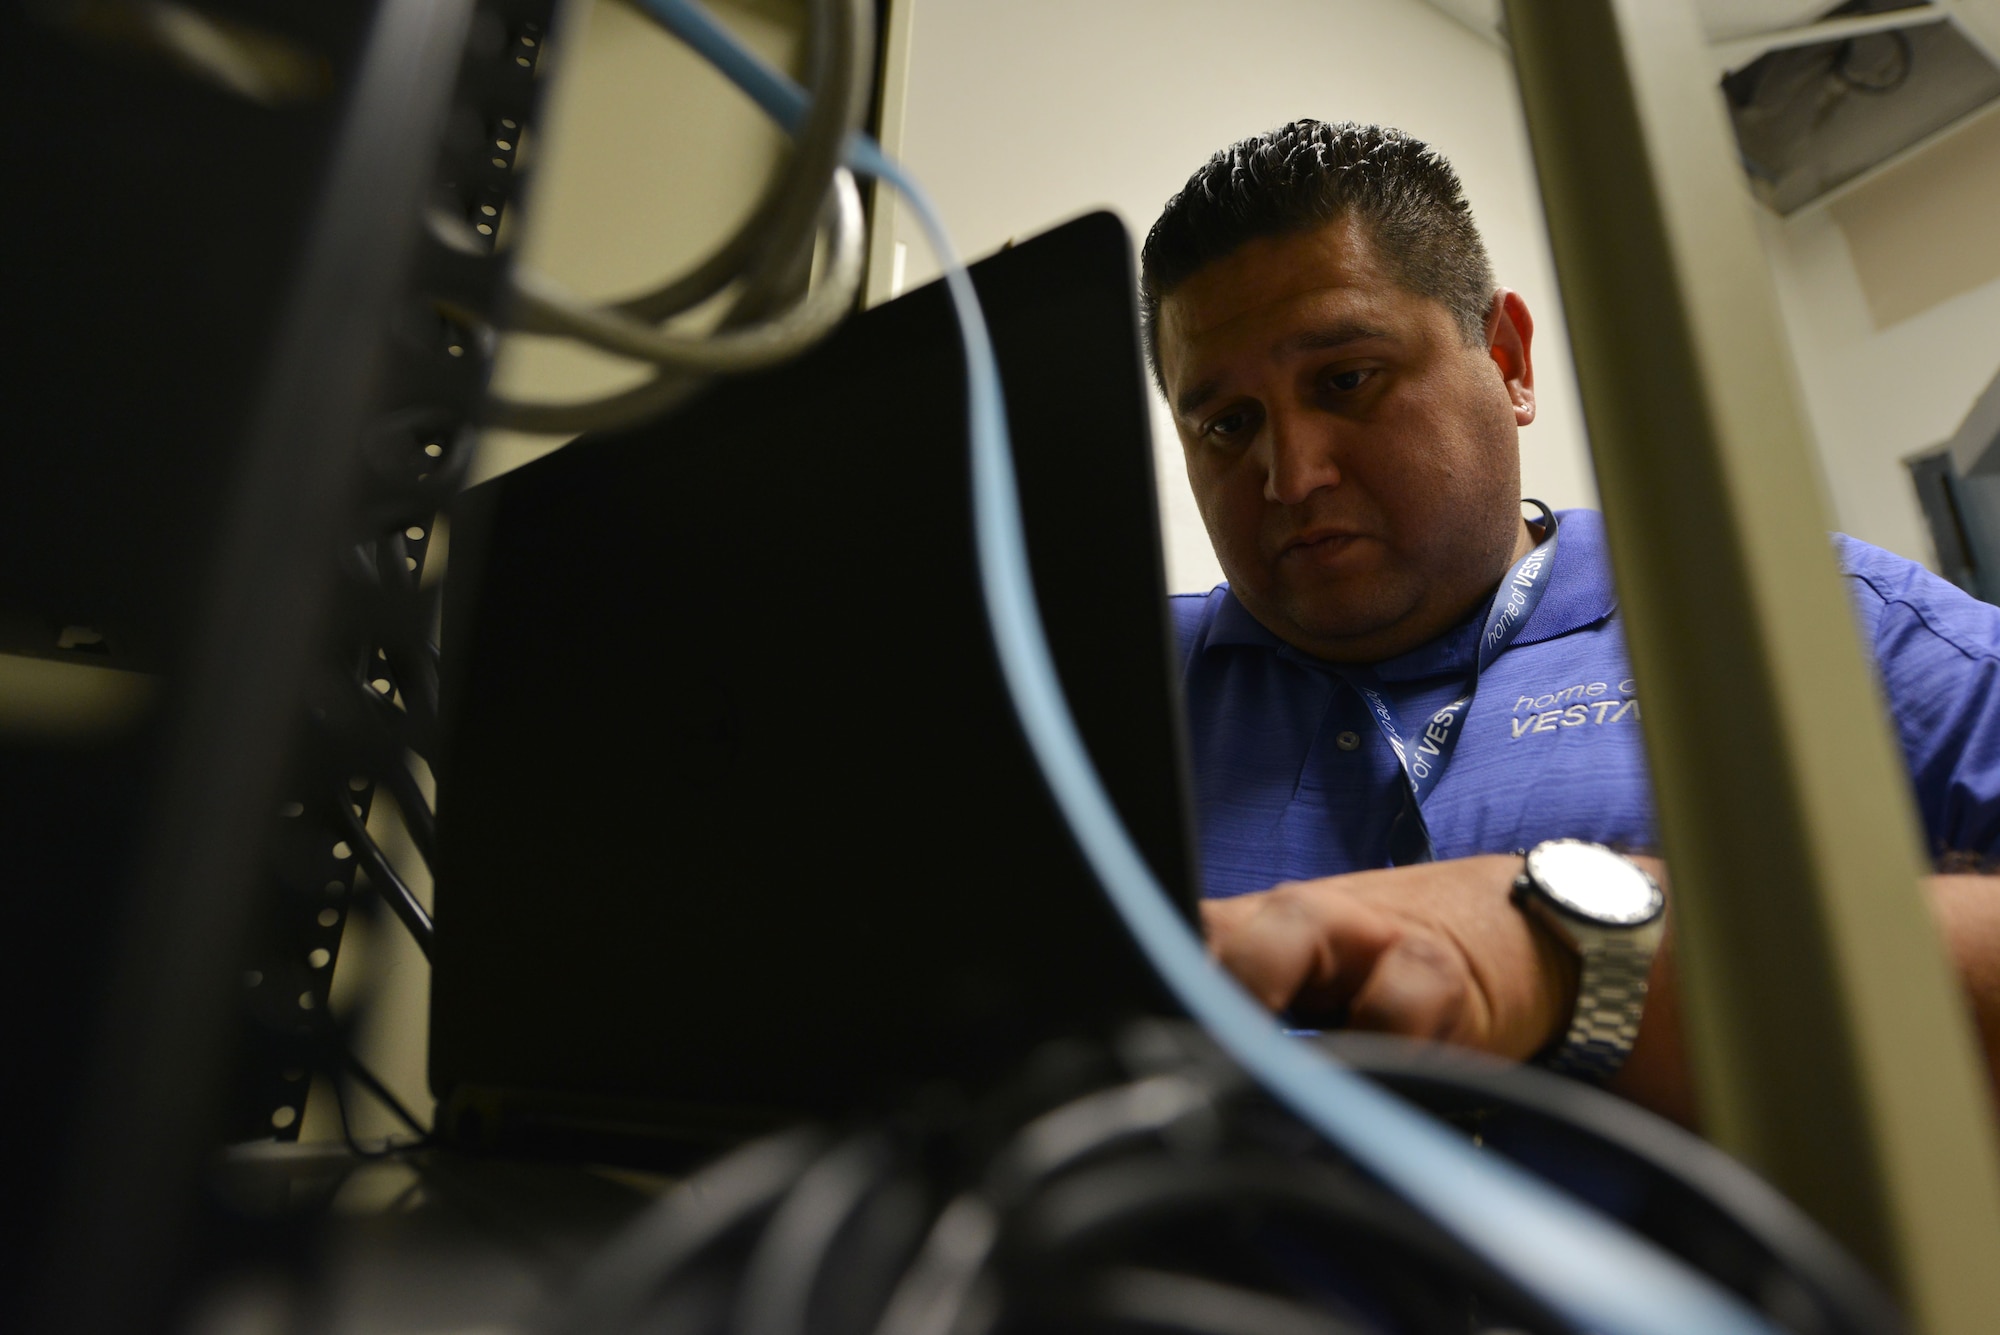 Jimmie De Armes, field engineer, configures a route from the emergency consoles to the communications server to allow the two systems to communicate at Shaw Air Force Base, S.C., July 12, 2017. De Armes configured the route for the Enhanced 911 system which received software and hardware updates, increasing speed and security. (U.S. Air Force photo by Airman 1st Class Destinee Sweeney)